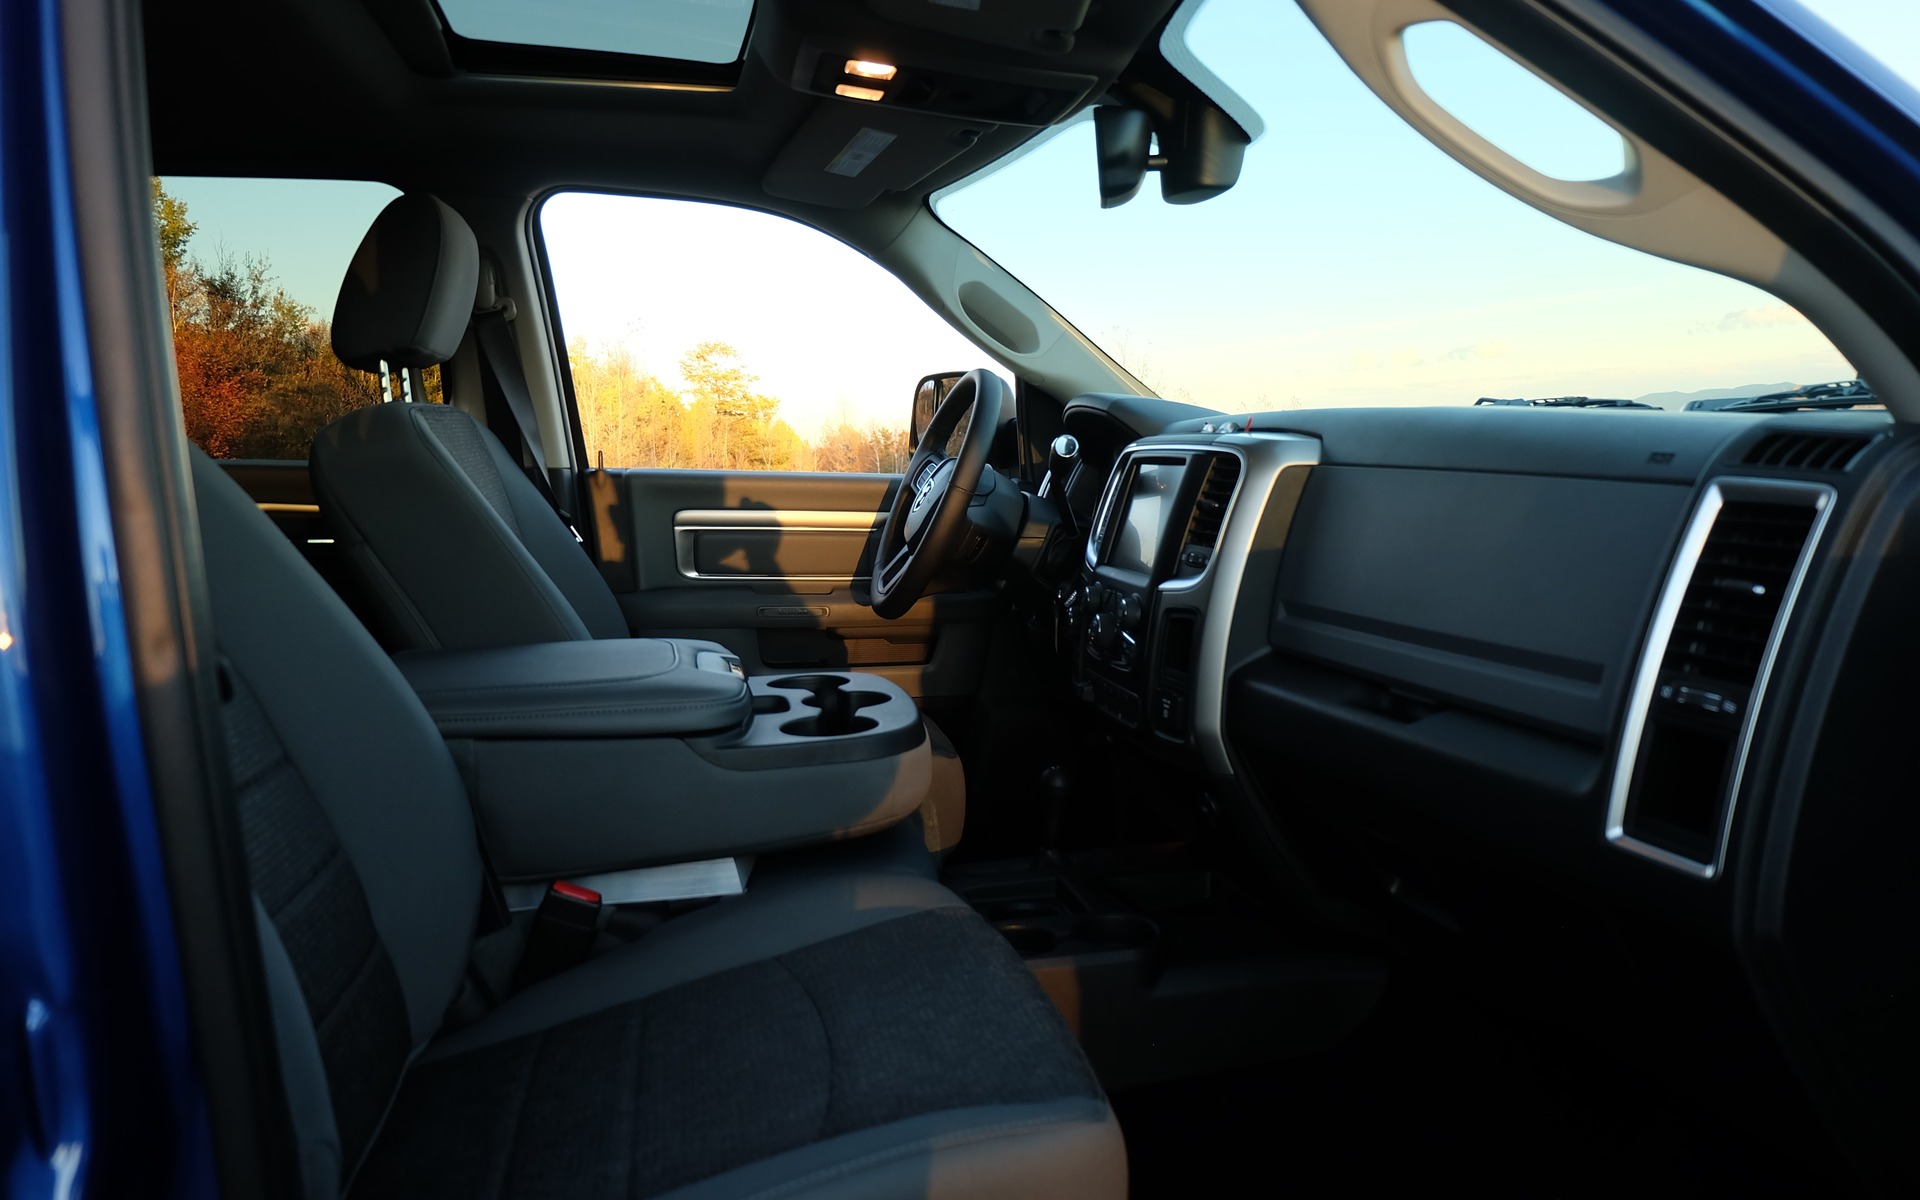 The Power Wagon comes with cloth seats and a bench up front.